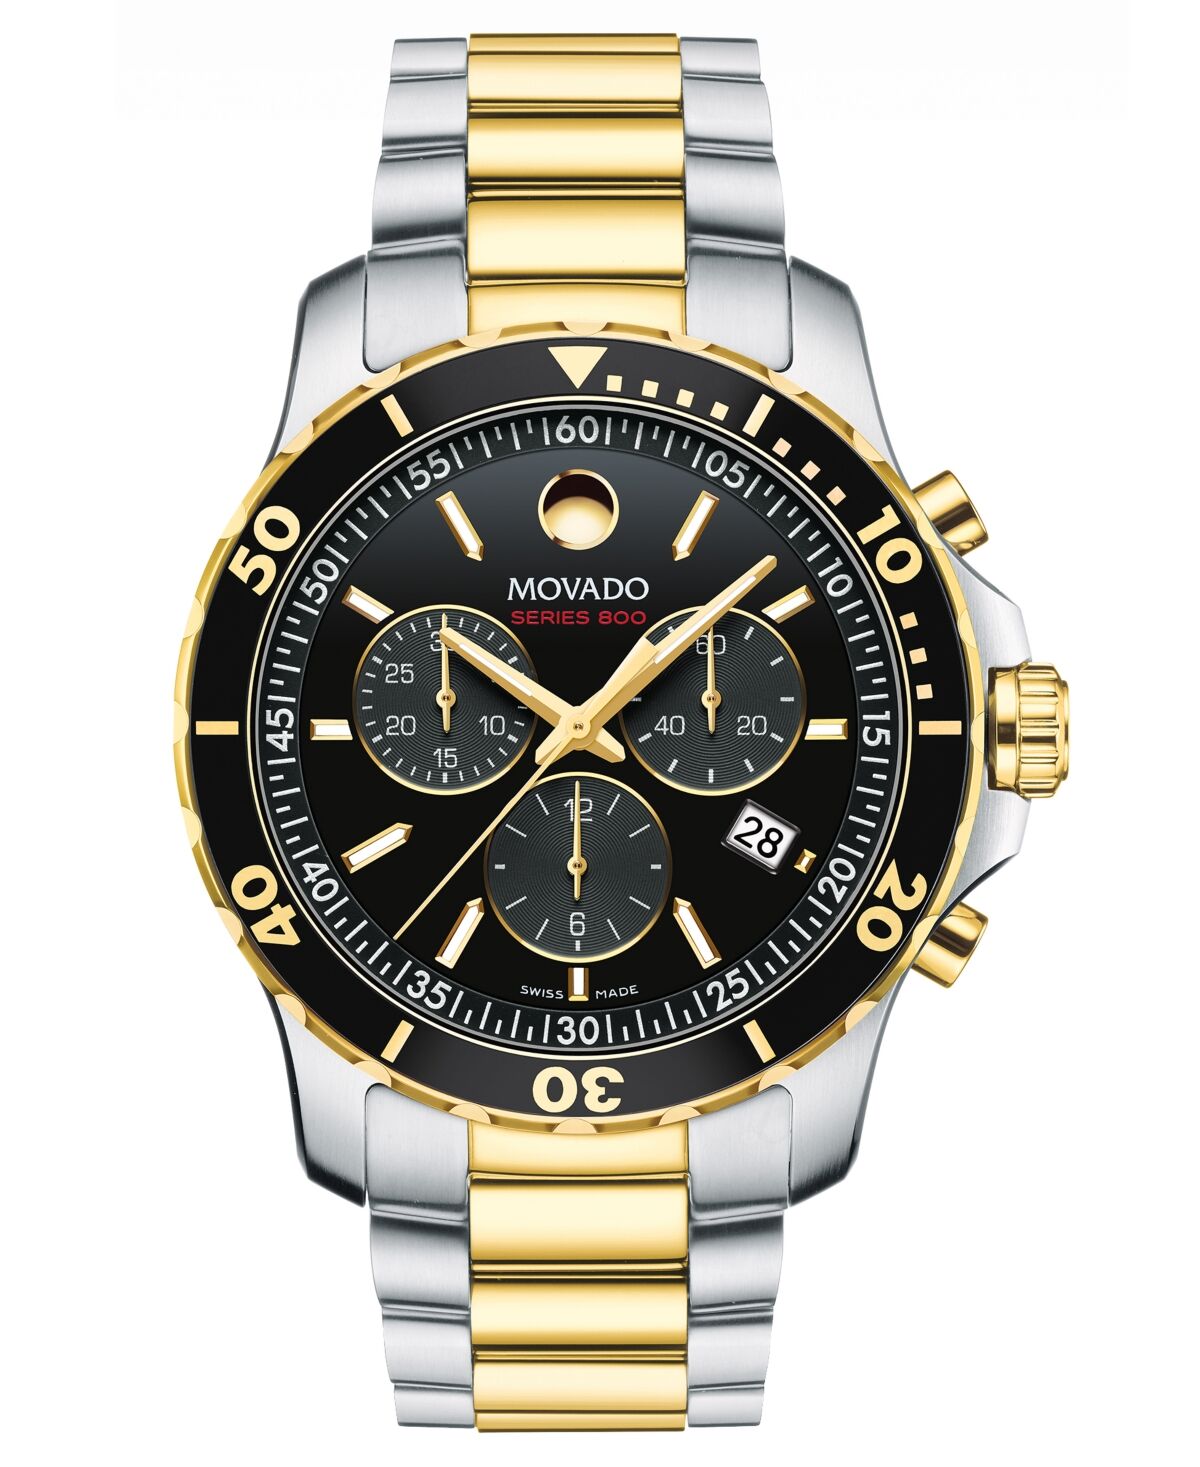 Movado Men's Swiss Chronograph Series 800 Two-Tone Pvd Stainless Steel Bracelet Diver Watch 42mm - Two Tone